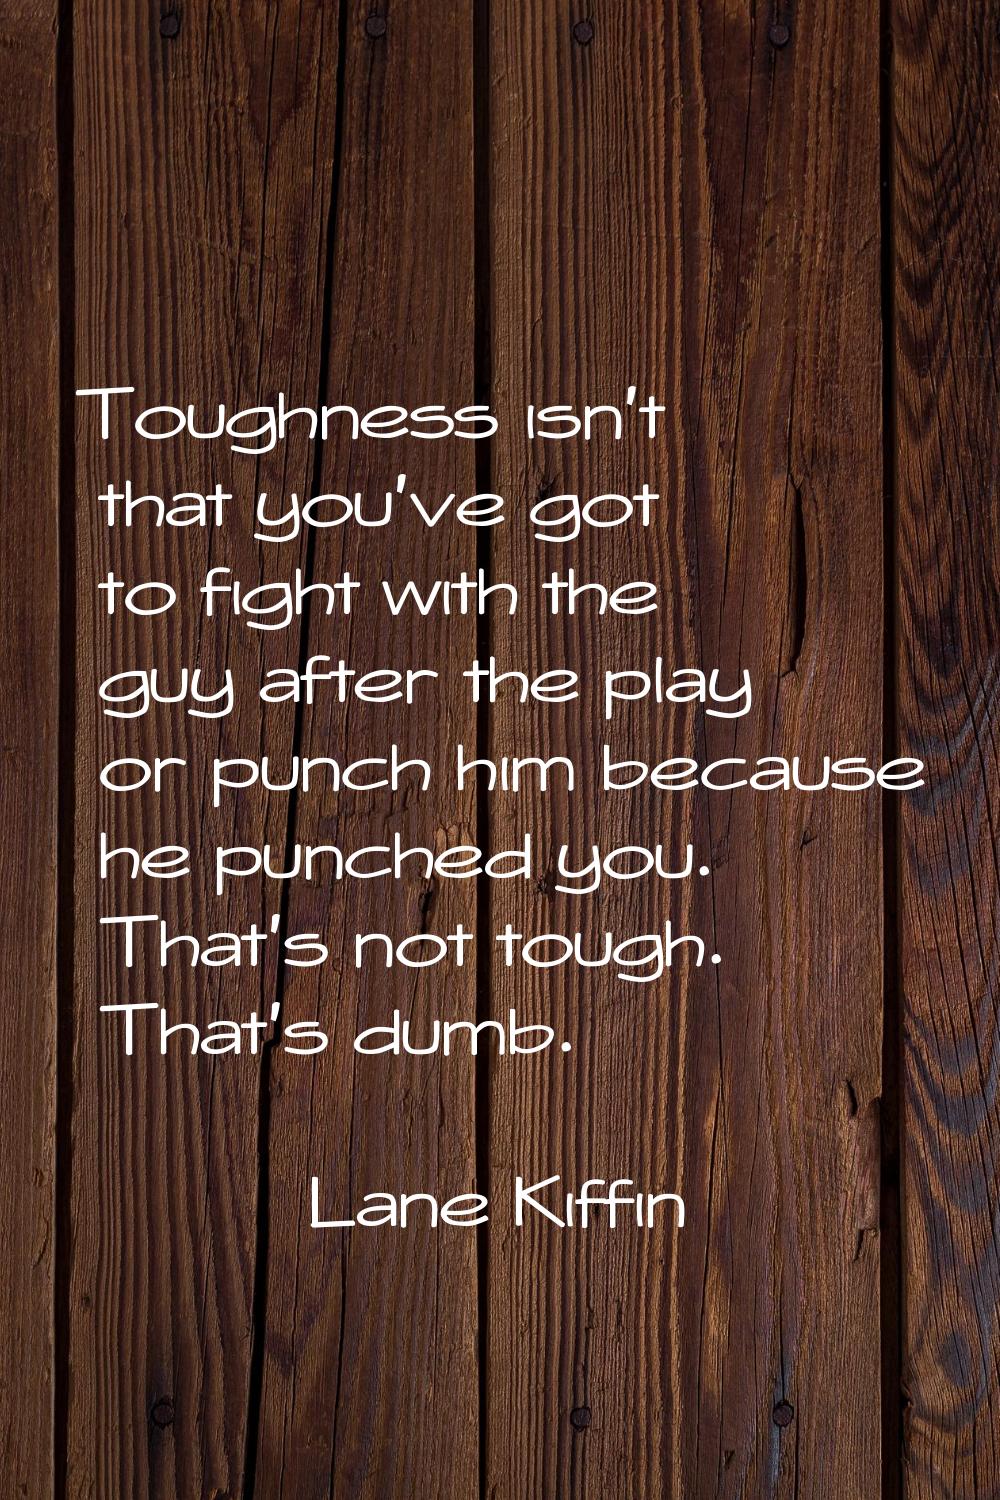 Toughness isn't that you've got to fight with the guy after the play or punch him because he punche